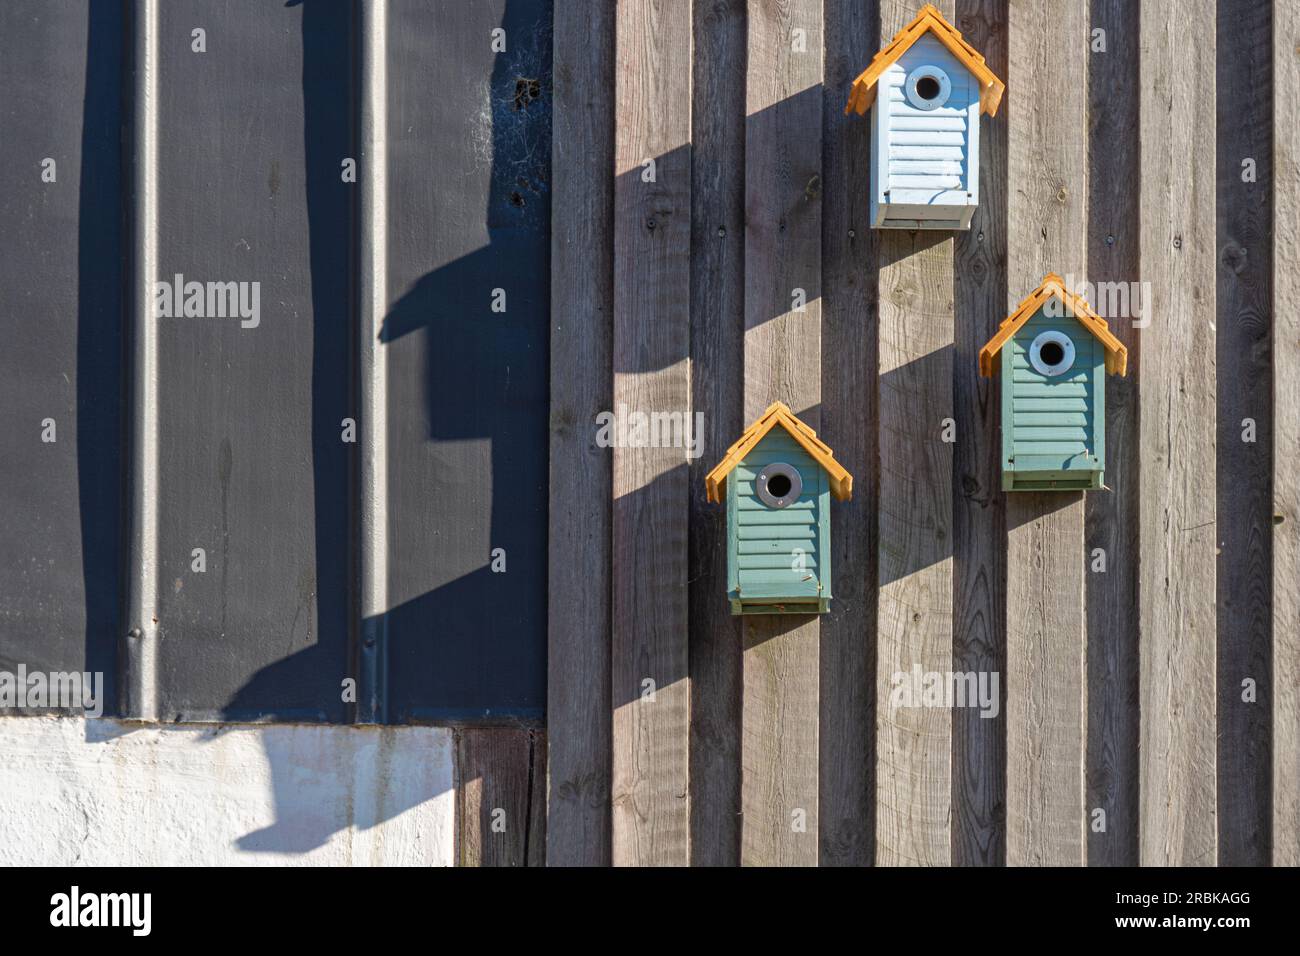 3 cozy little bird boxes fixed on a wooden barn wall in late afternoon light Stock Photo